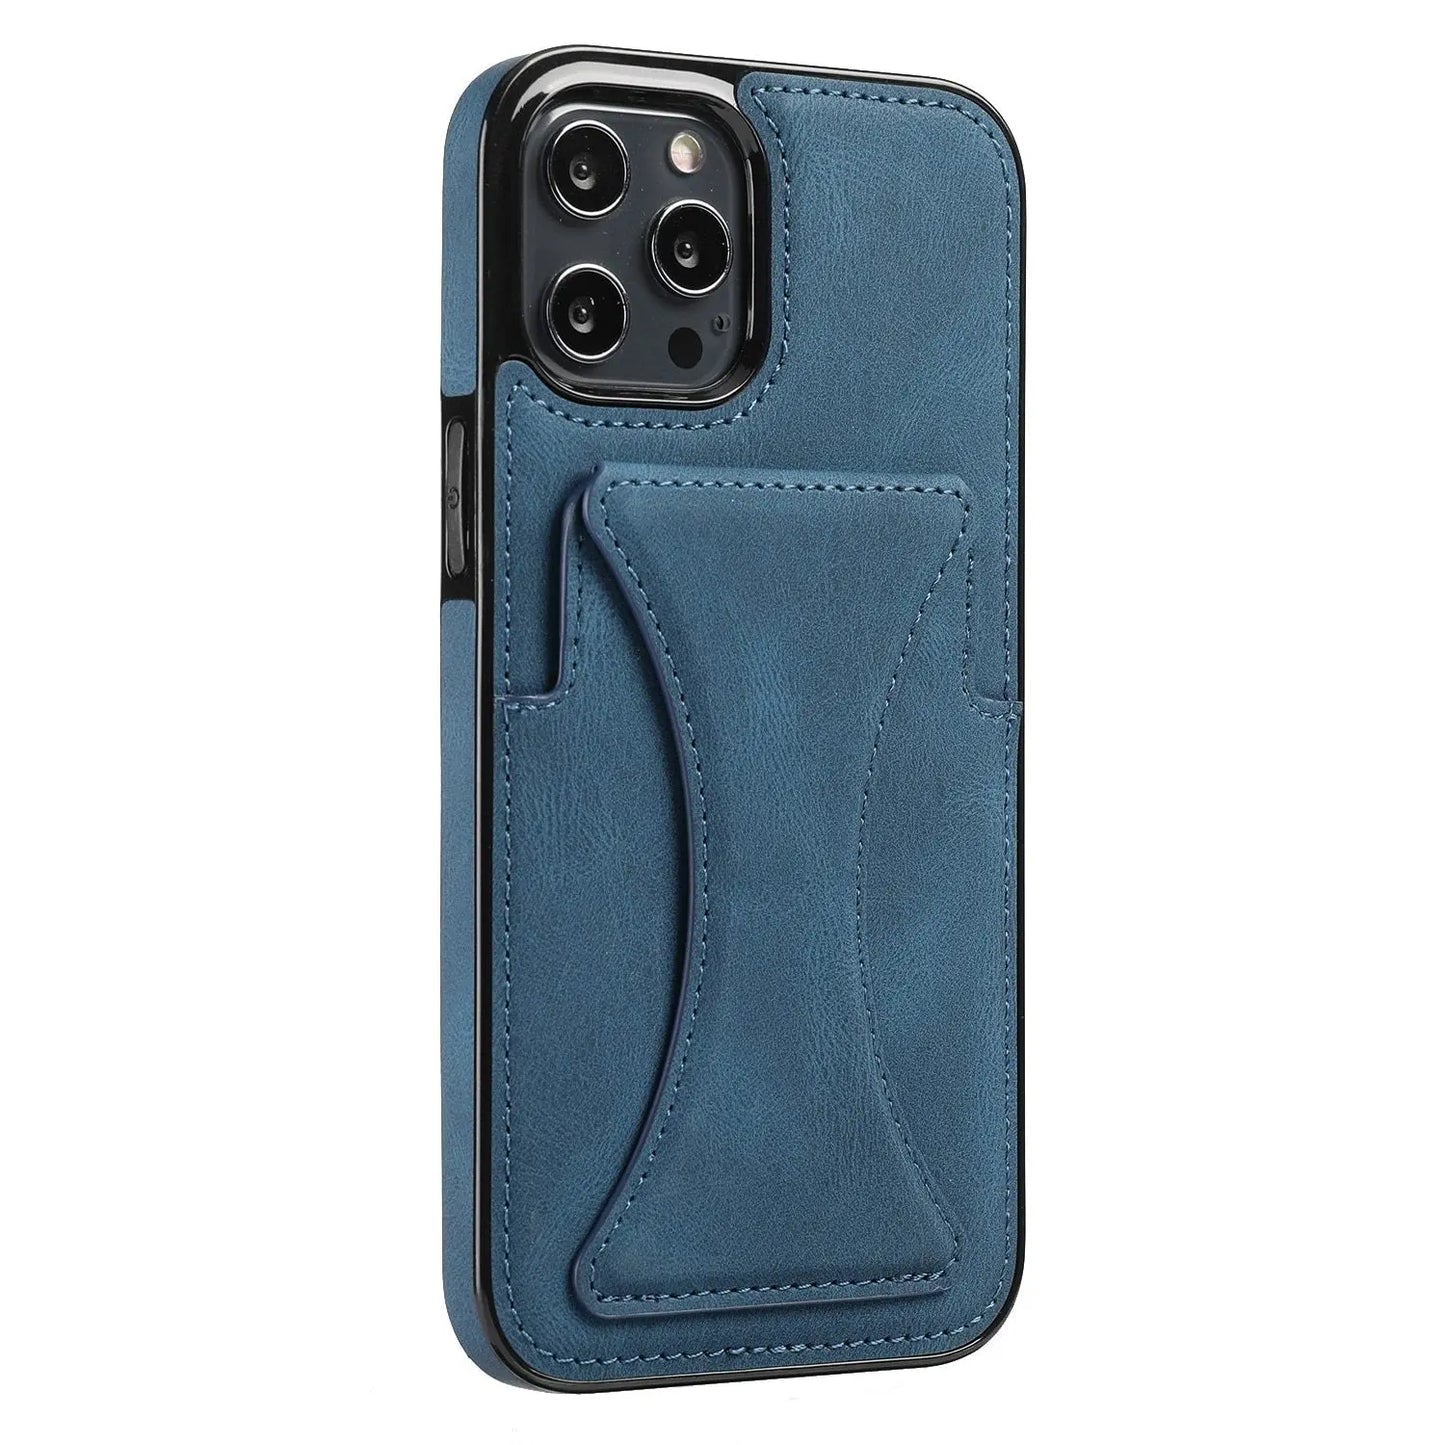 Amare Leather iPhone Case With Card Holder phone case iphone
Samsung cases
OnePlus cases
Huawei cases